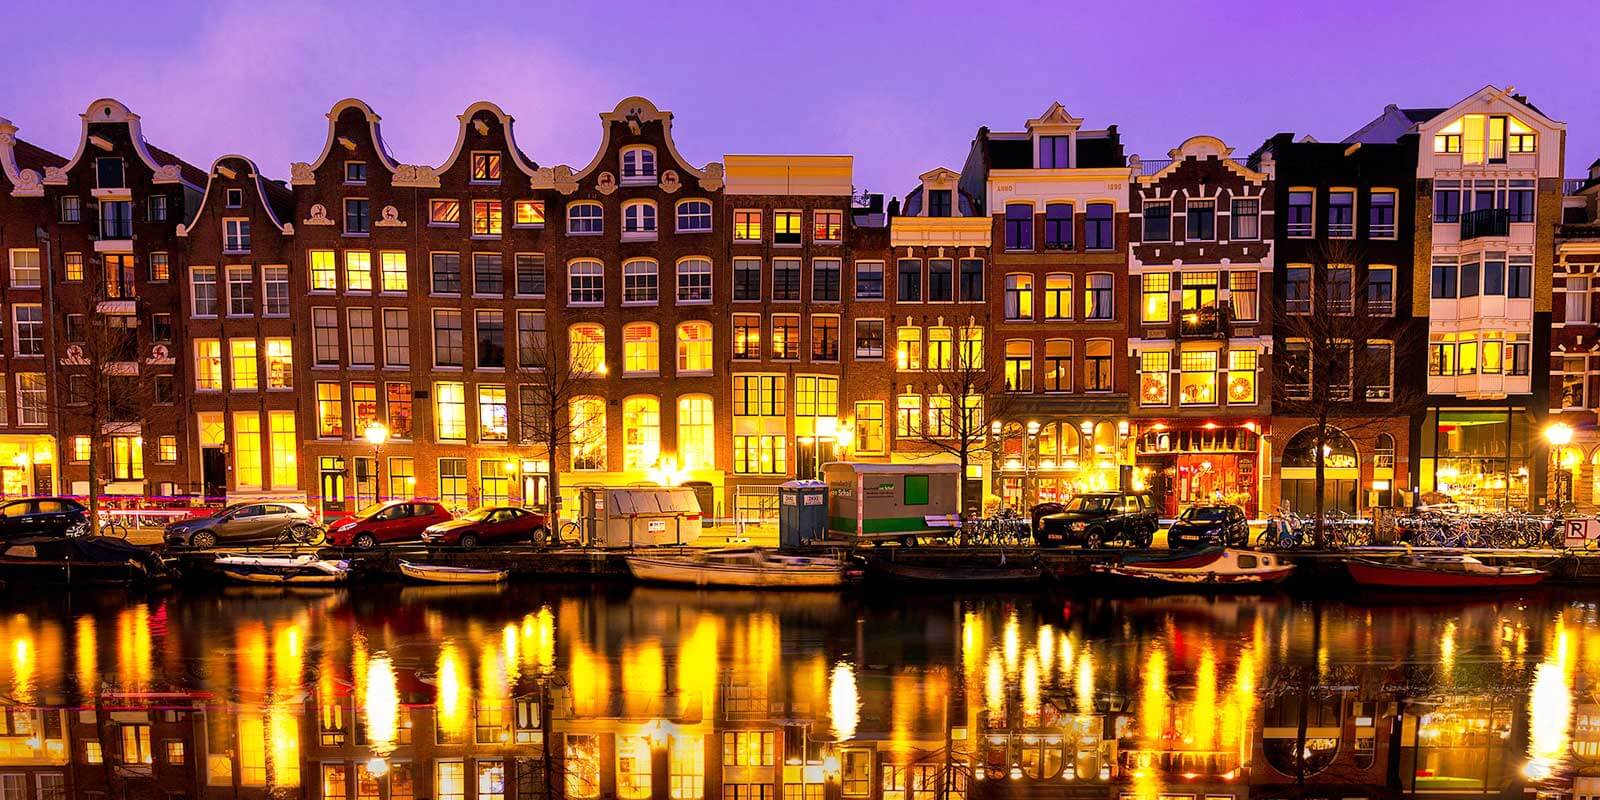 Stroll along the beautiful canals of Amsterdam in the Netherlands.